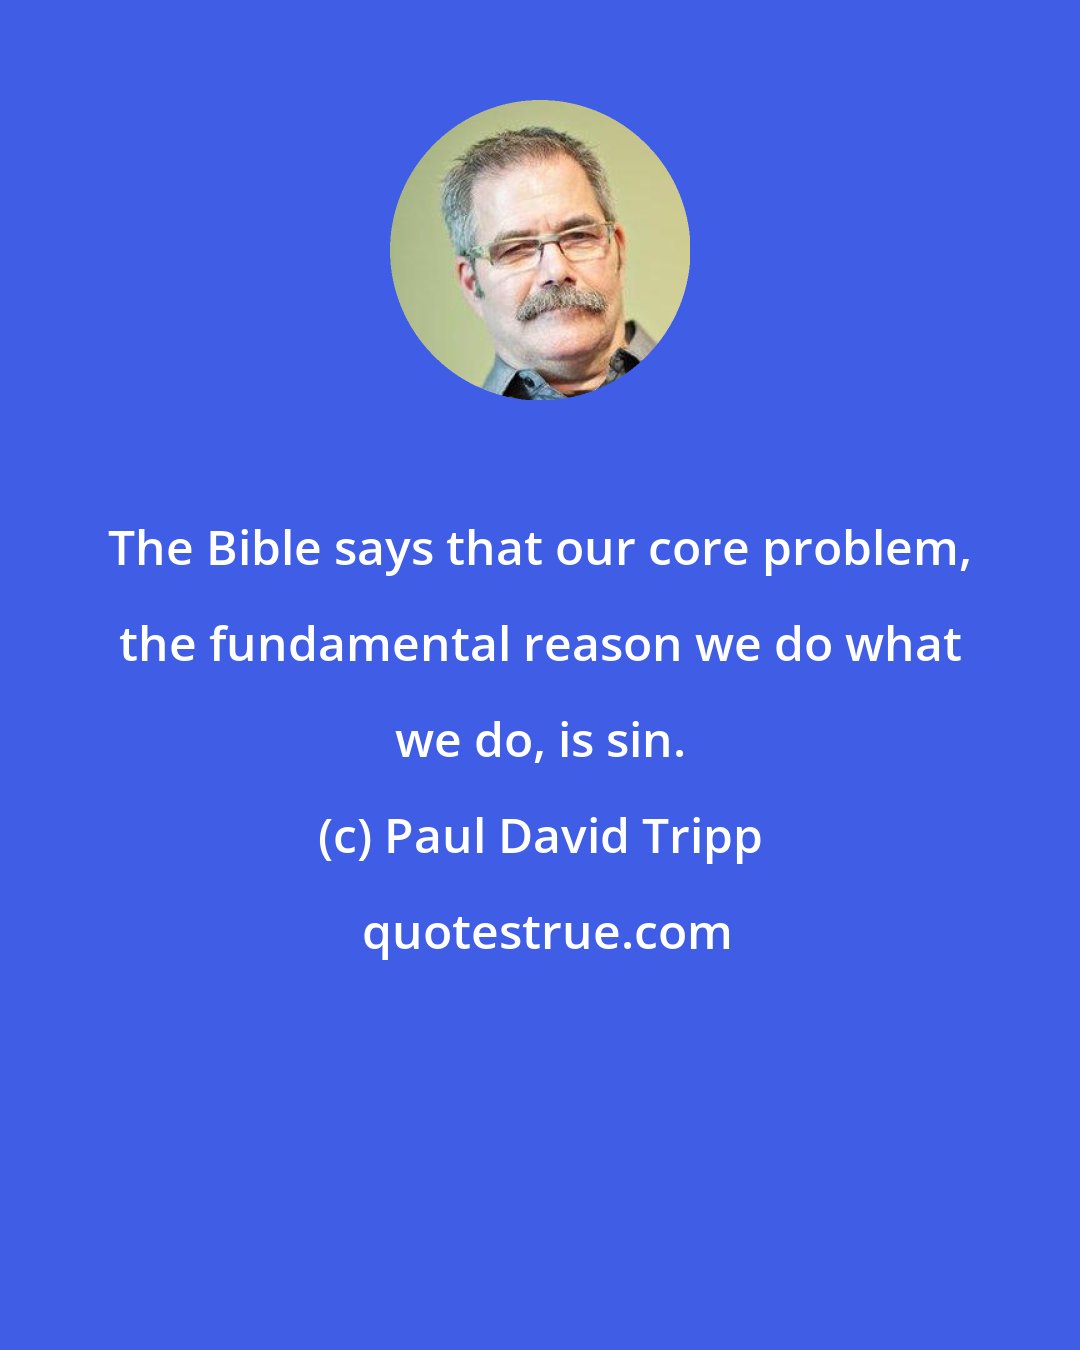 Paul David Tripp: The Bible says that our core problem, the fundamental reason we do what we do, is sin.